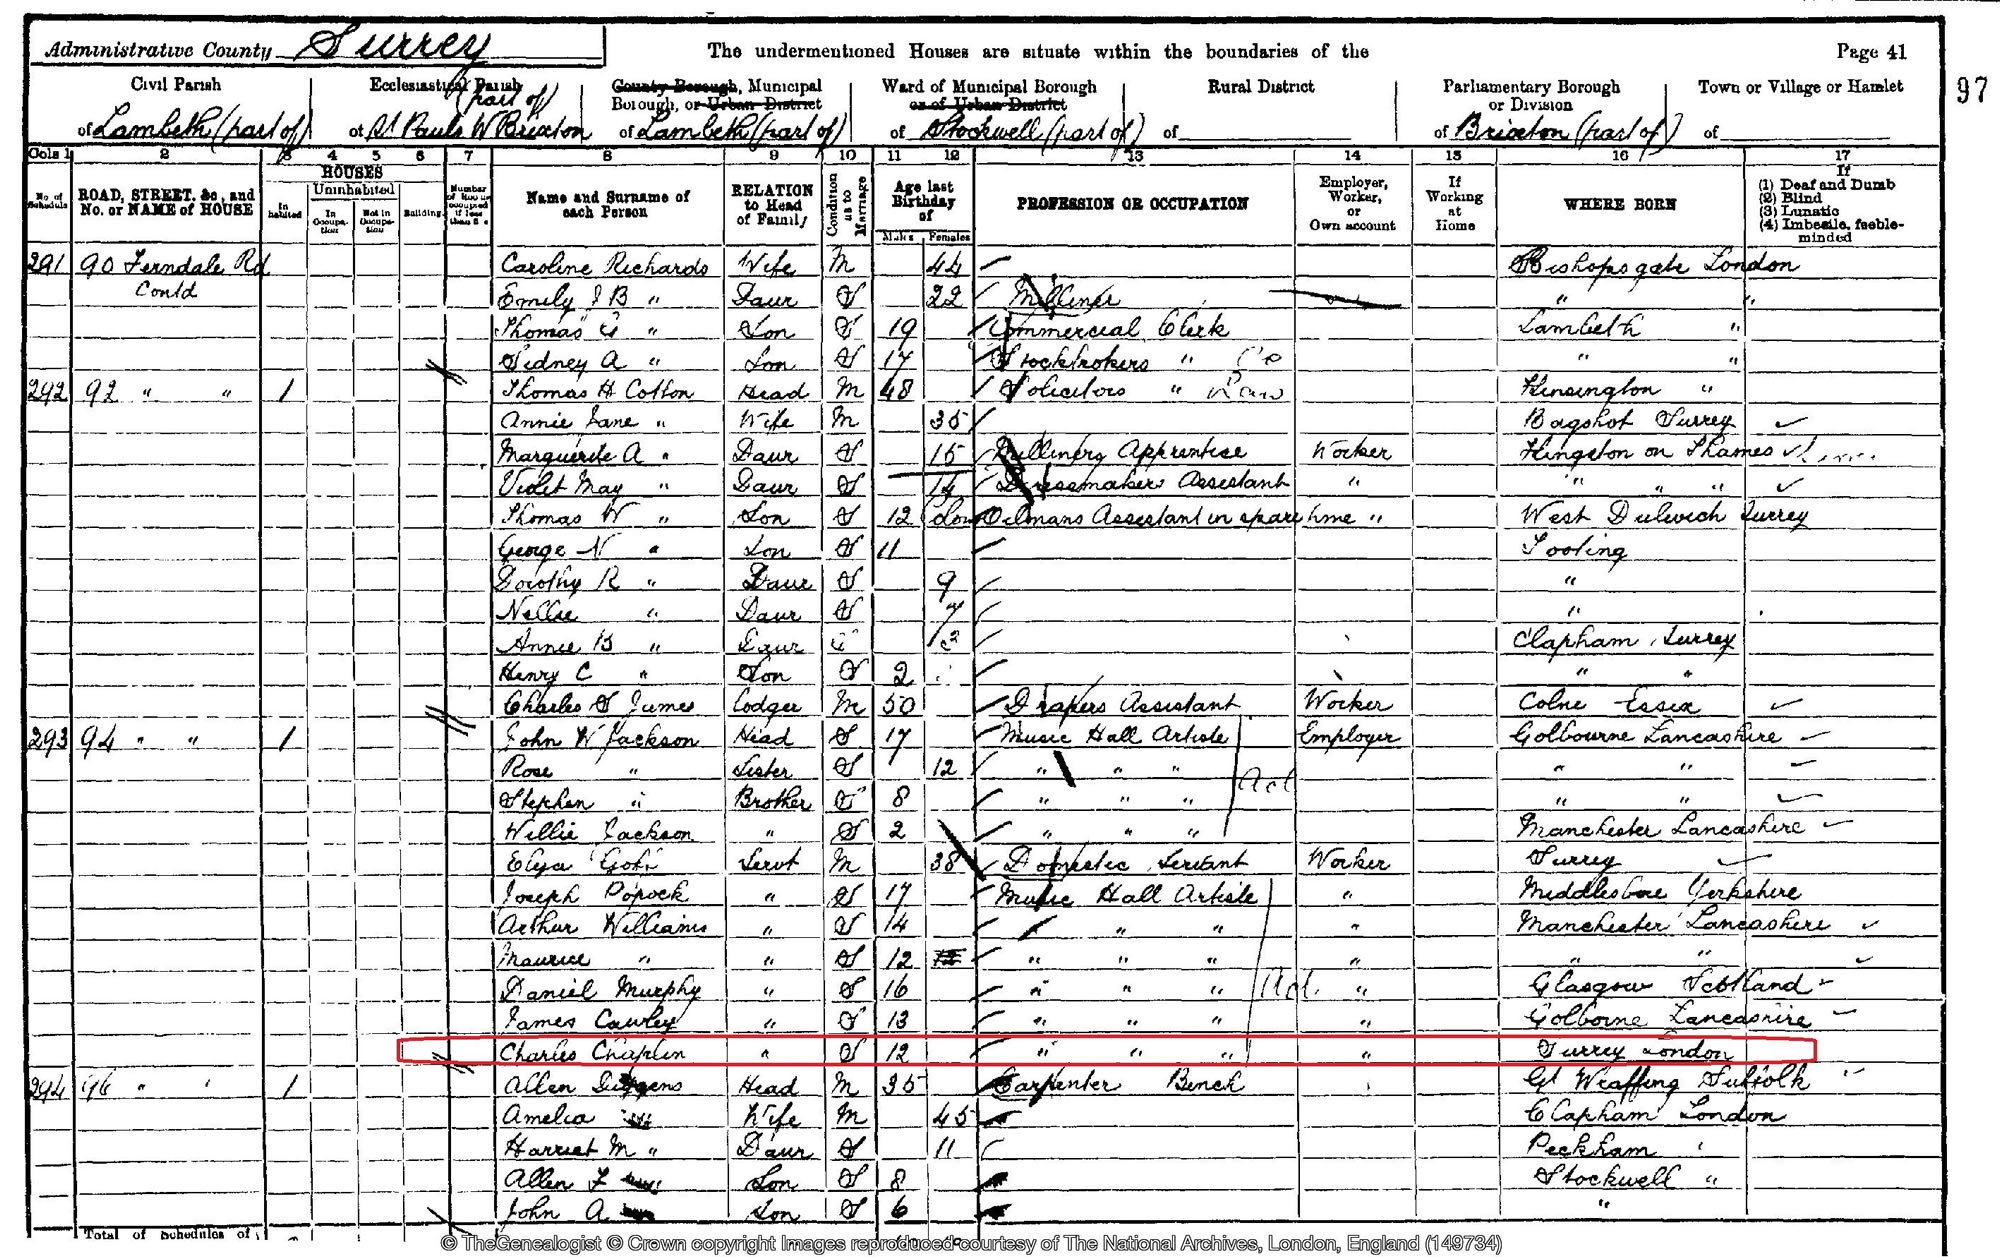 1901 Census image for Charlie Chaplin